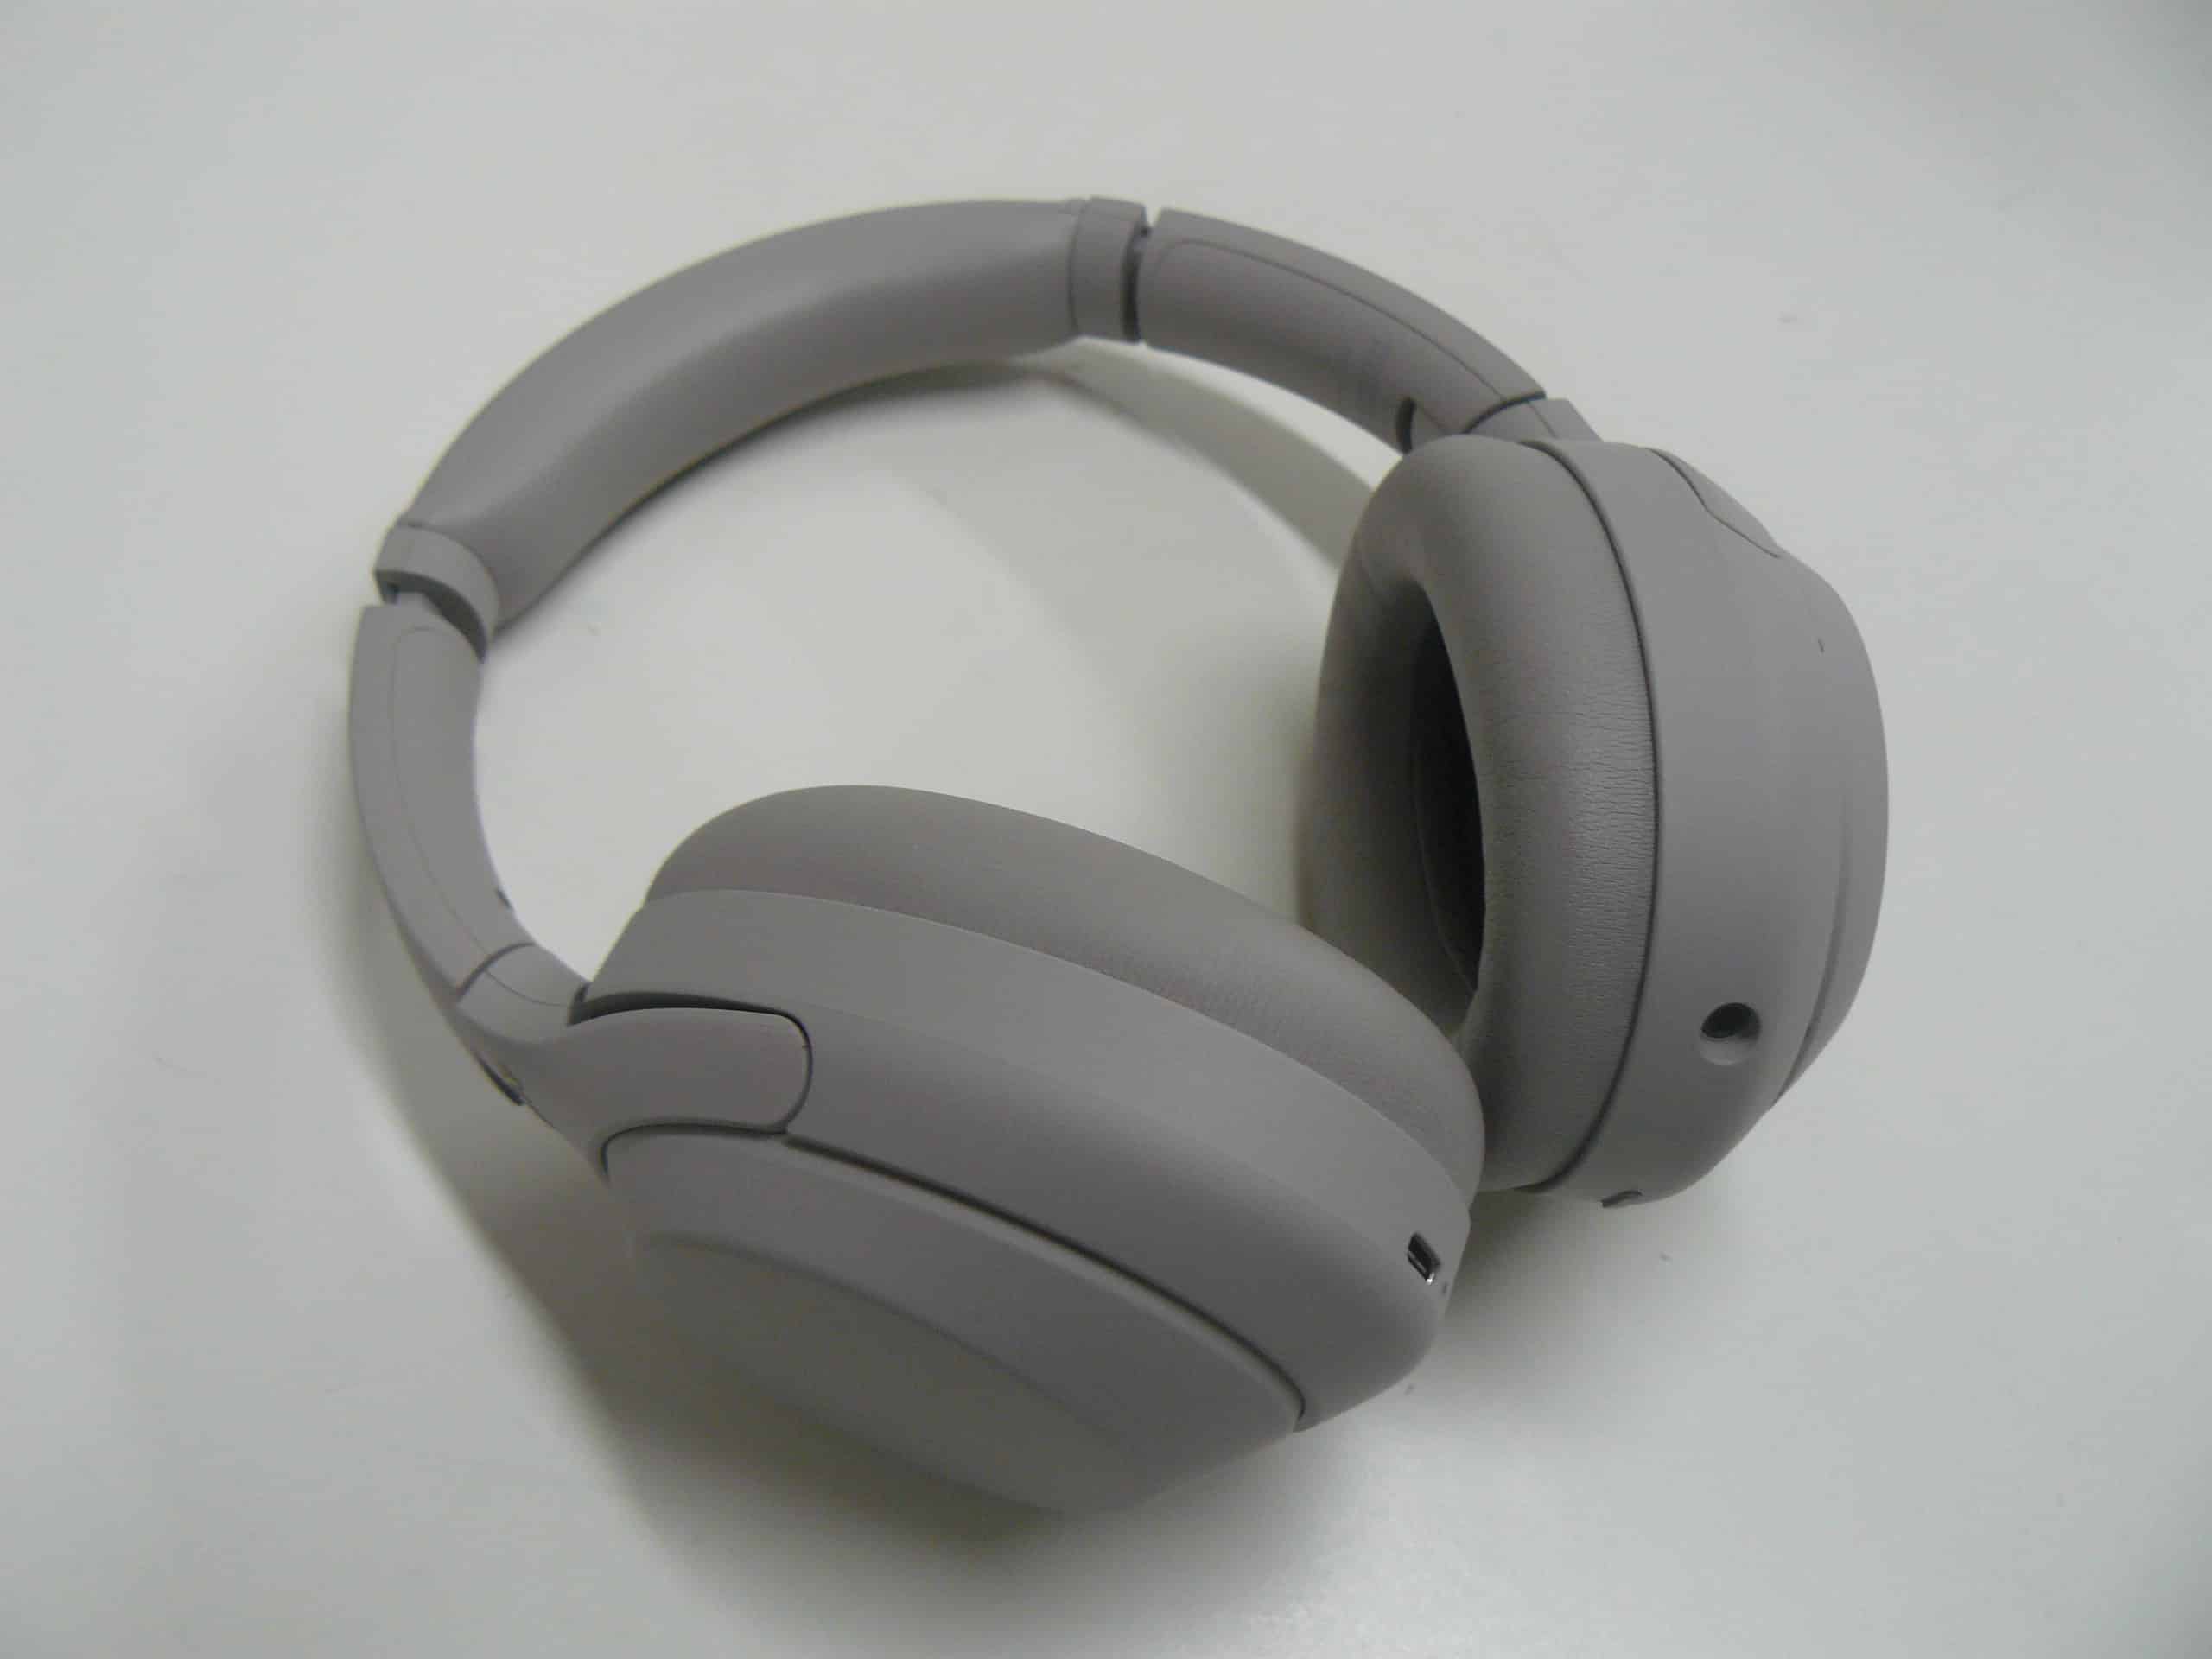 Sony is releasing its WH-1000XM4 headphones in white for a limited time